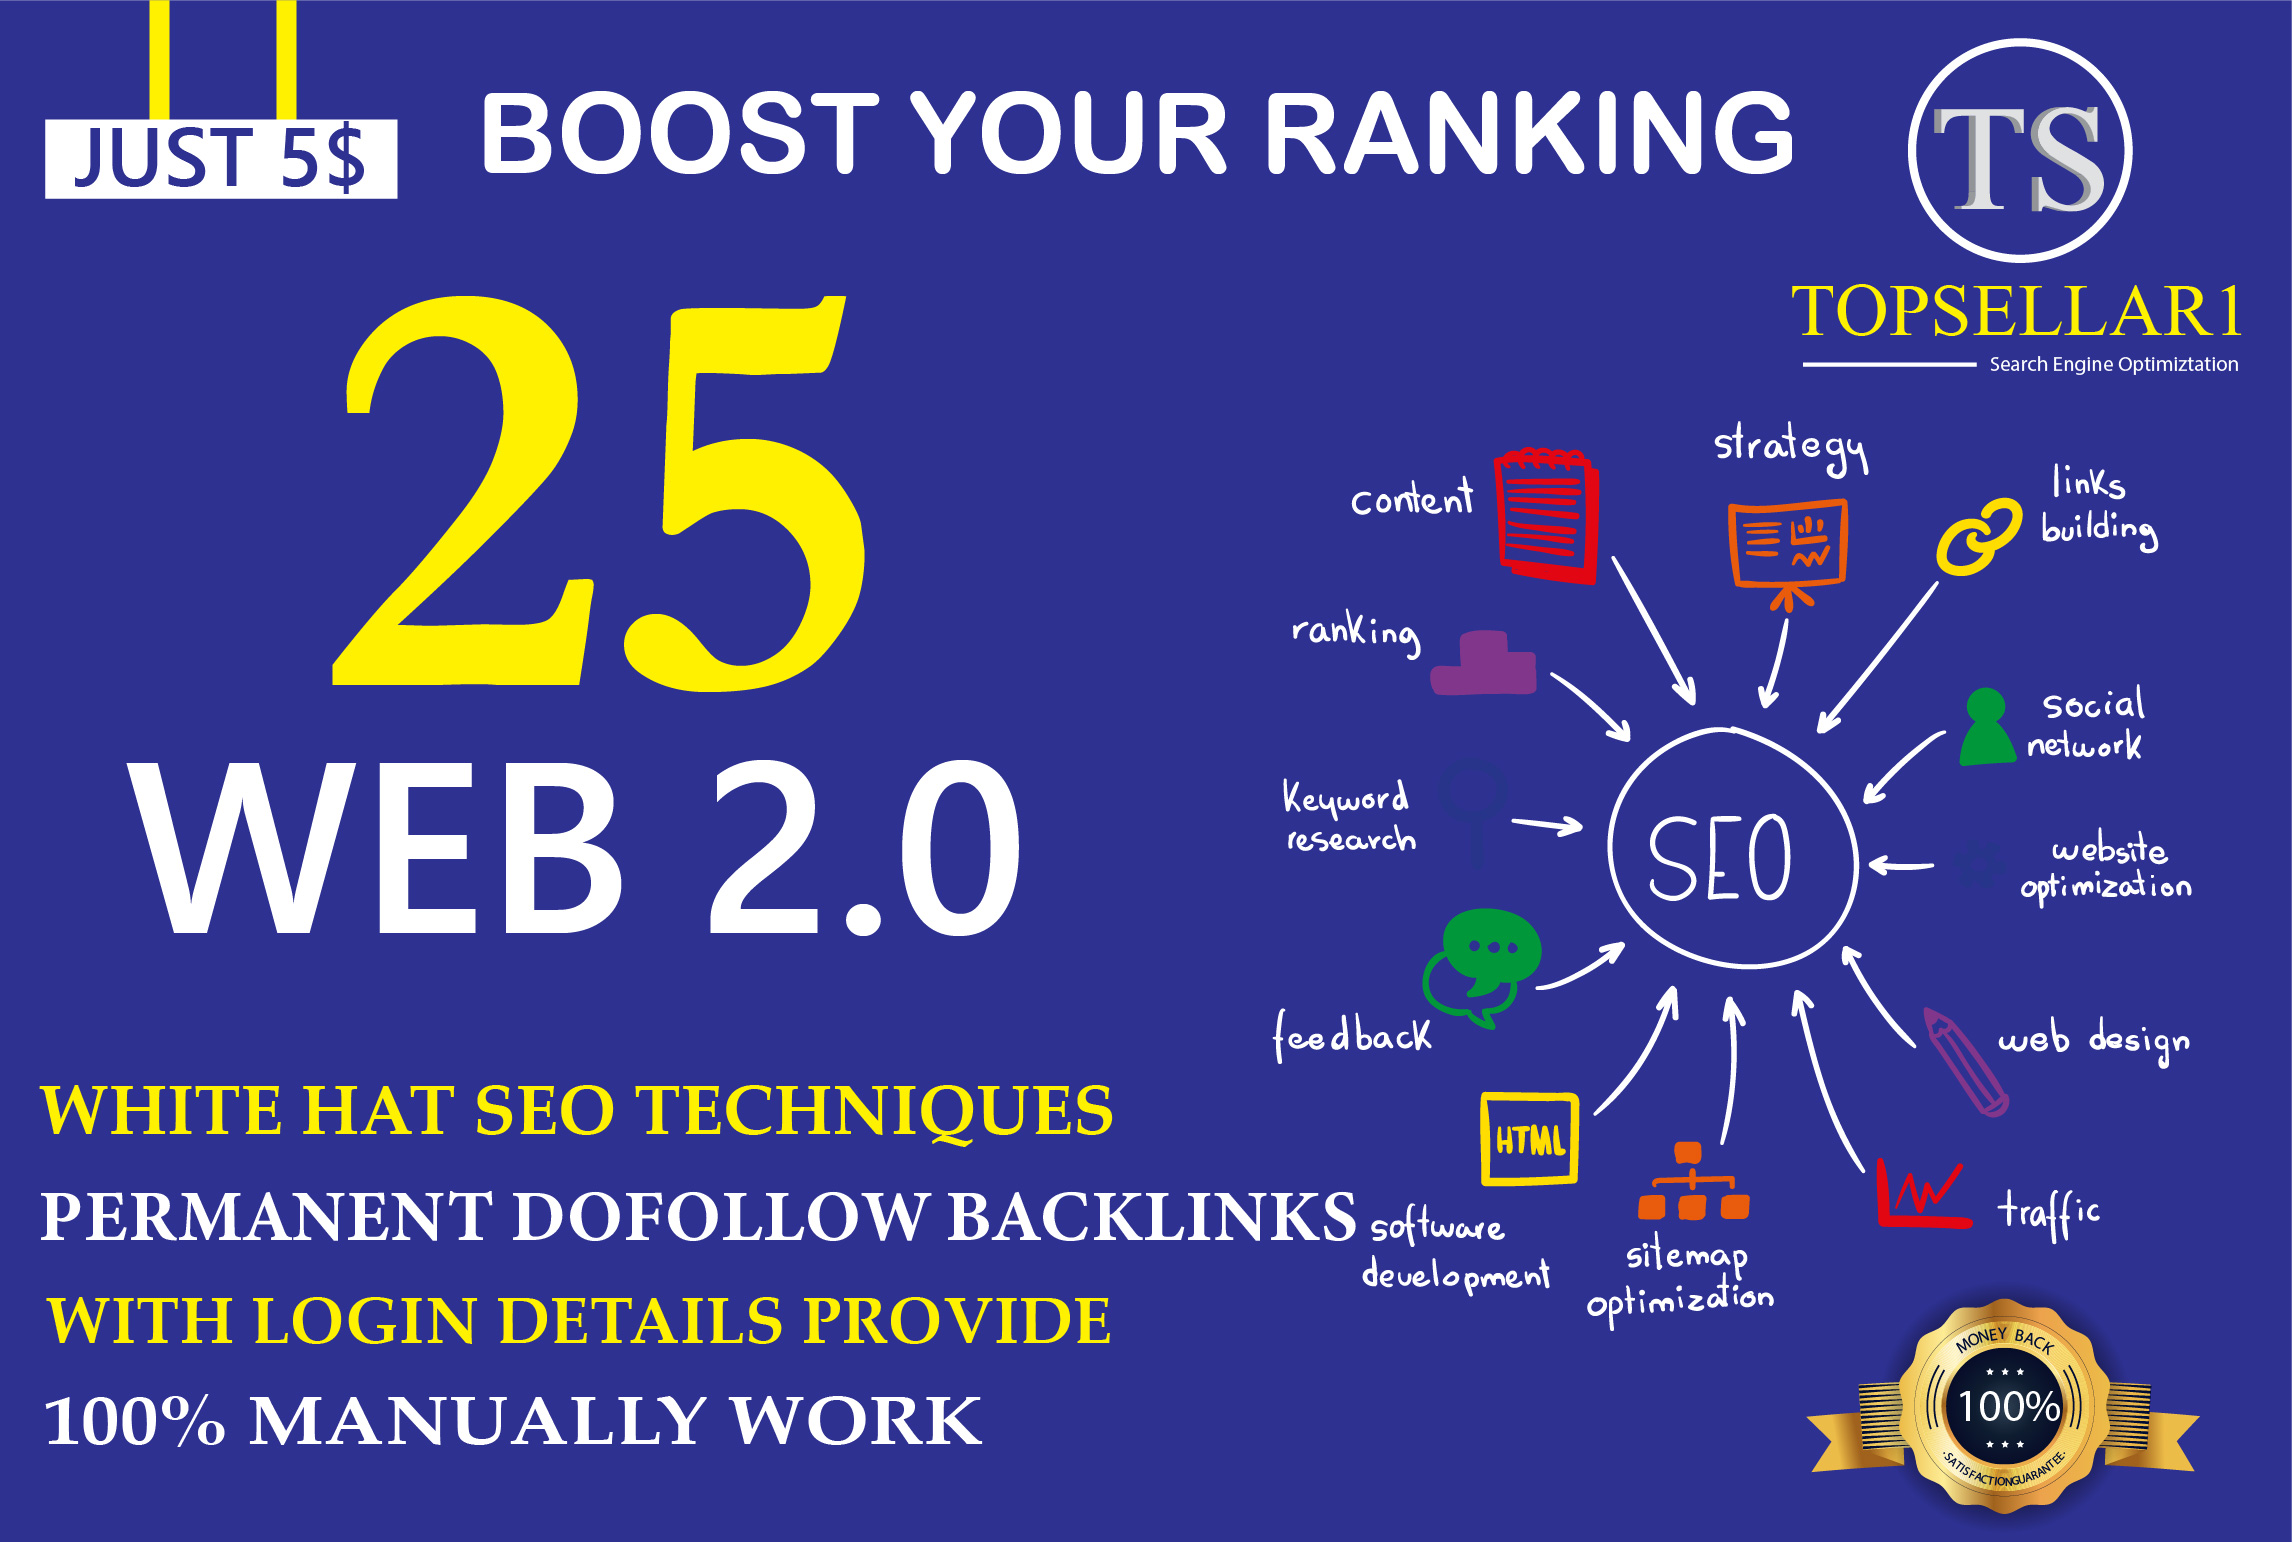 create 25 super web 2.0 blog properties with login for contextual backlinks